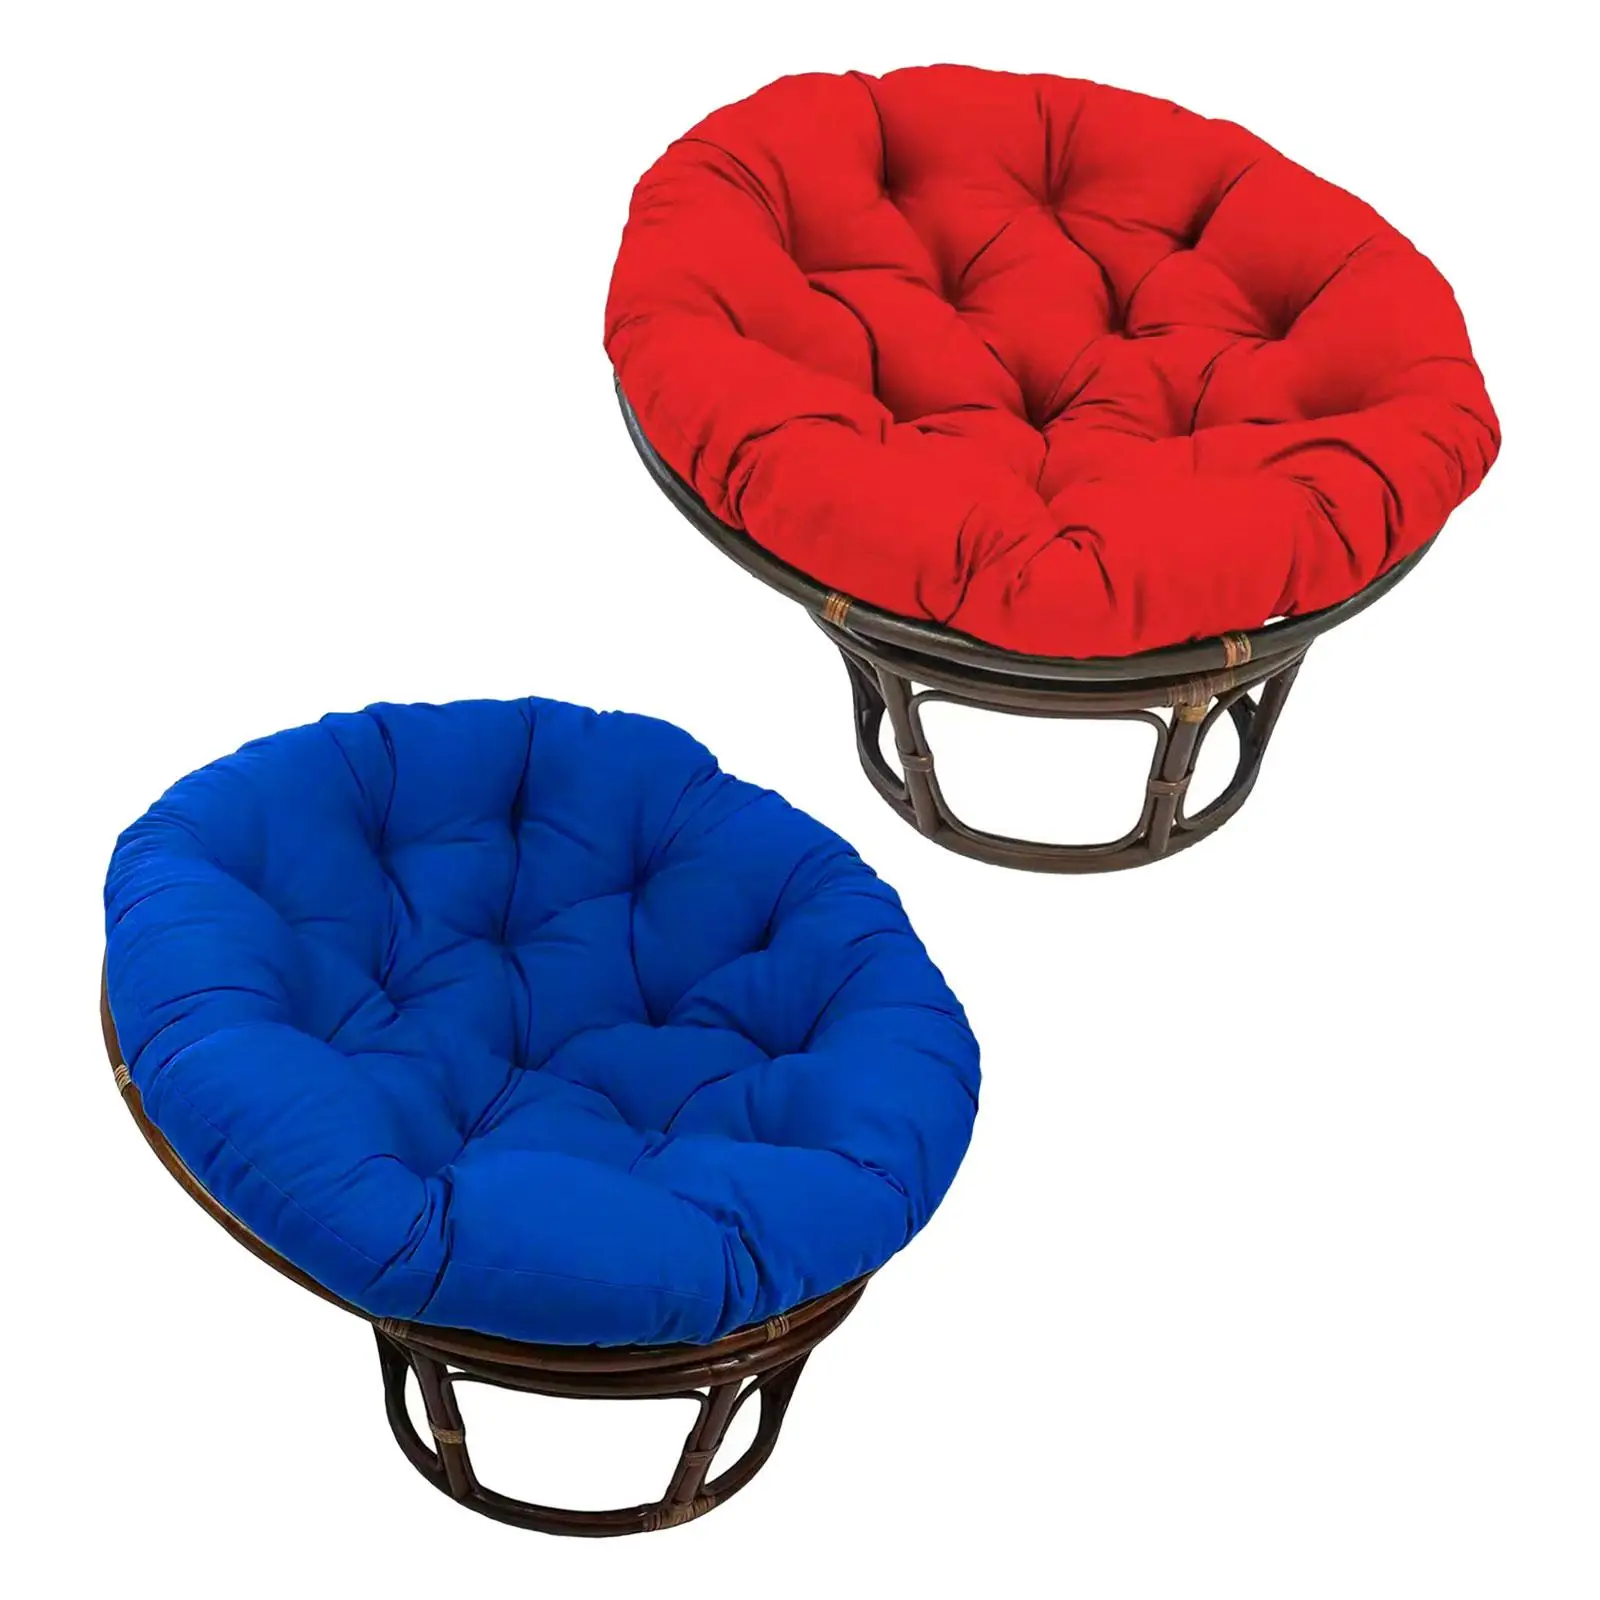 Egg Swing Chair Cushion 60cmx60cm Egg Chair Cushion Replacement Washable for Rocking Chairs Hammock Chair Hanging Baskets